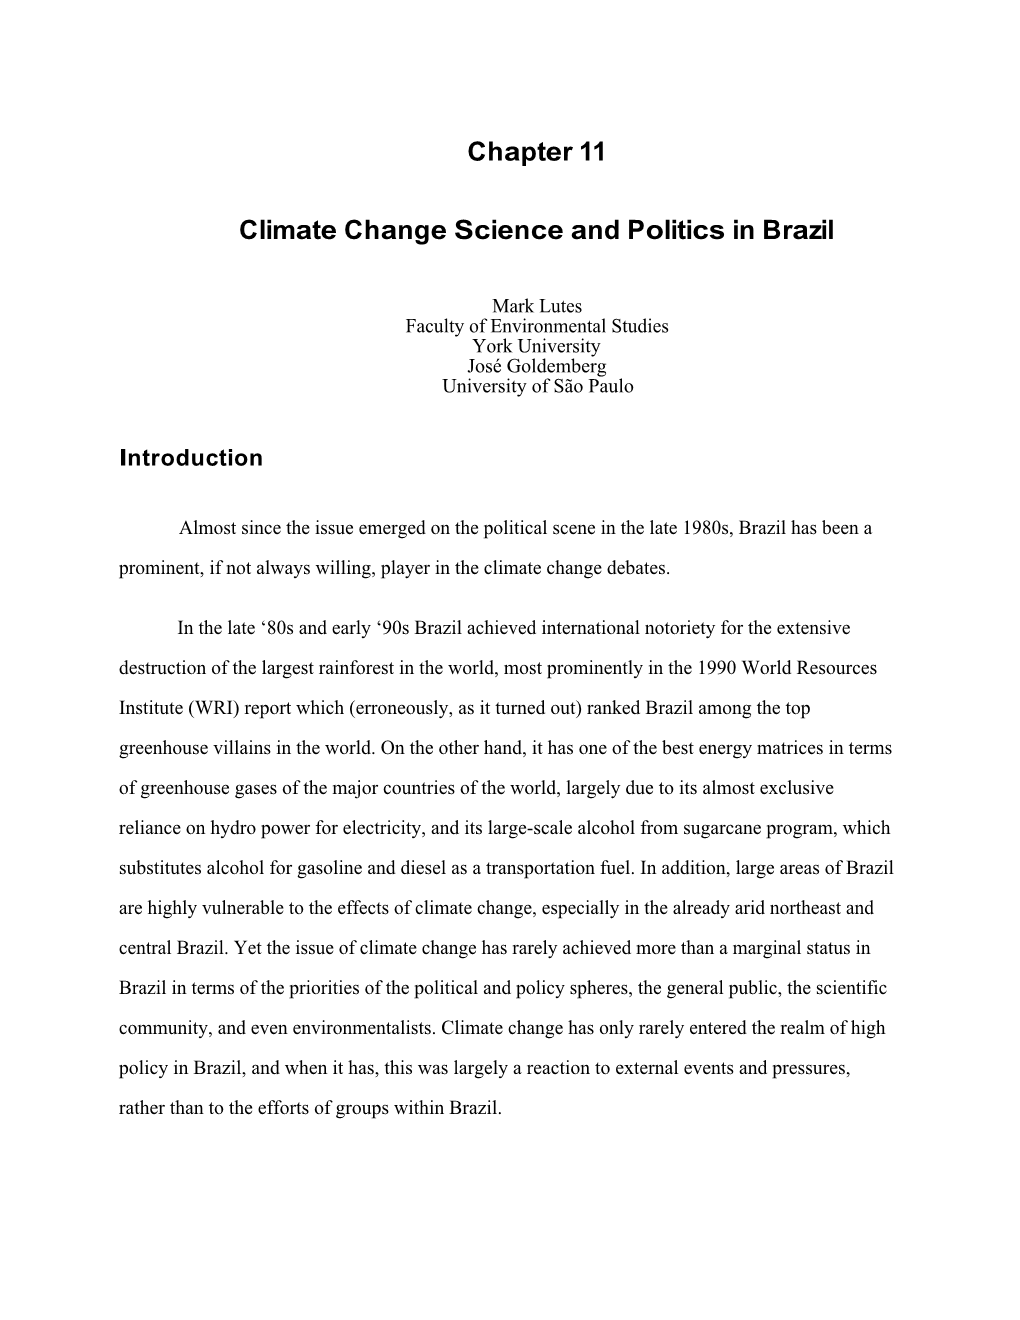 Chapter 11 Climate Change Science and Politics in Brazil